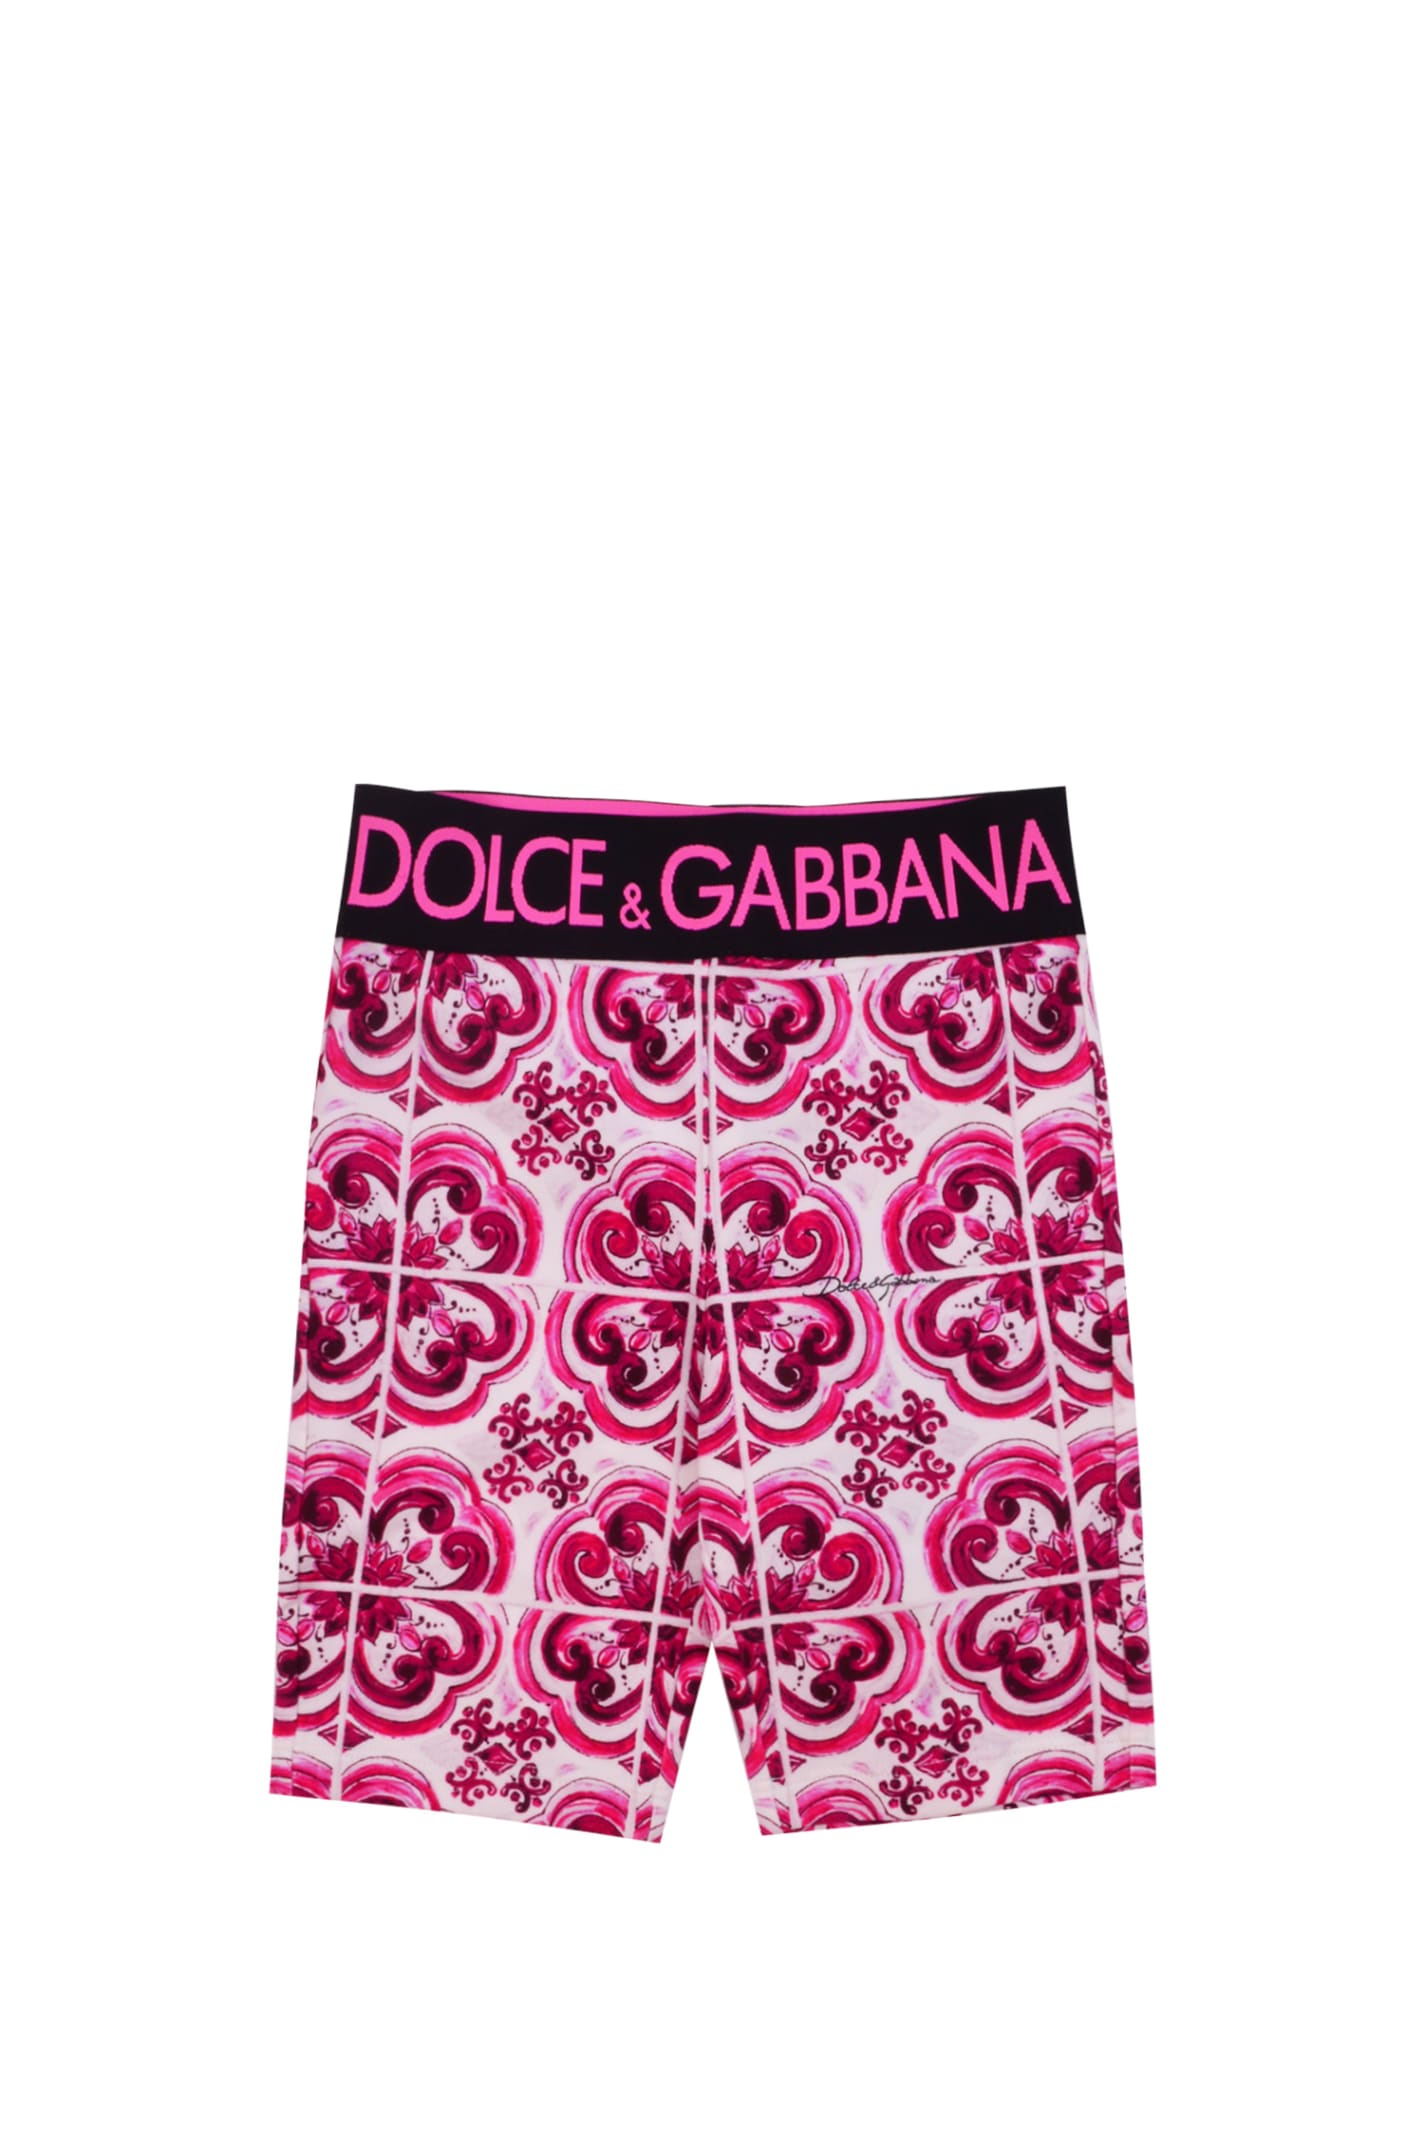 DOLCE & GABBANA STRETCH SHORTS WITH LOGO AND MAJOLICA PRINT